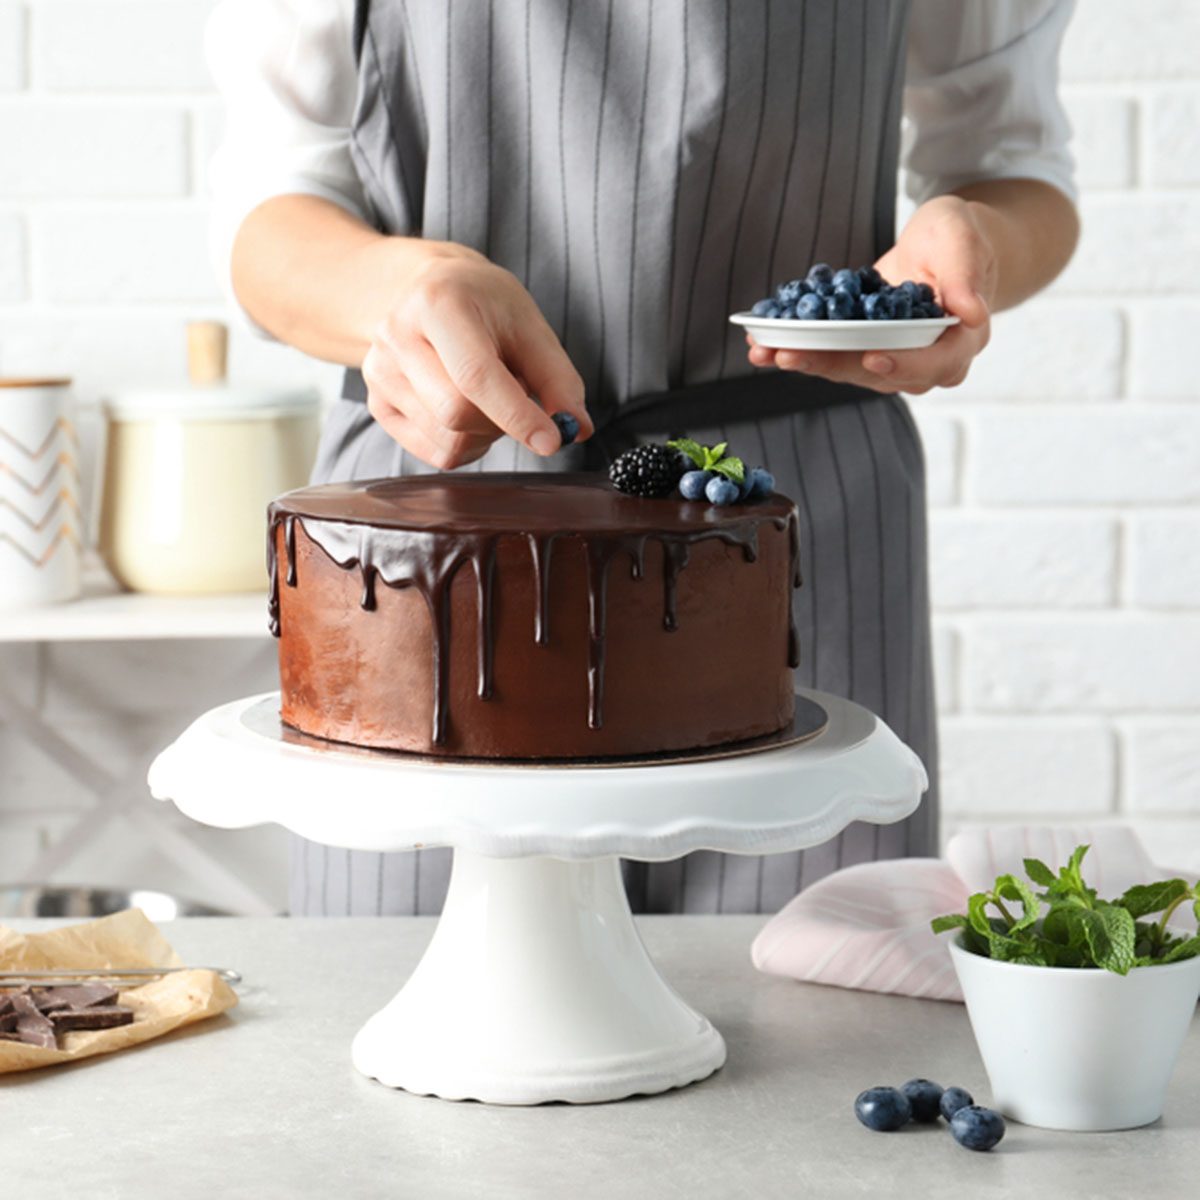 Baker decorating fresh delicious homemade chocolate cake with berries on table, closeup; Shutterstock ID 1167742222; Job (TFH, TOH, RD, BNB, CWM, CM): Taste of Home